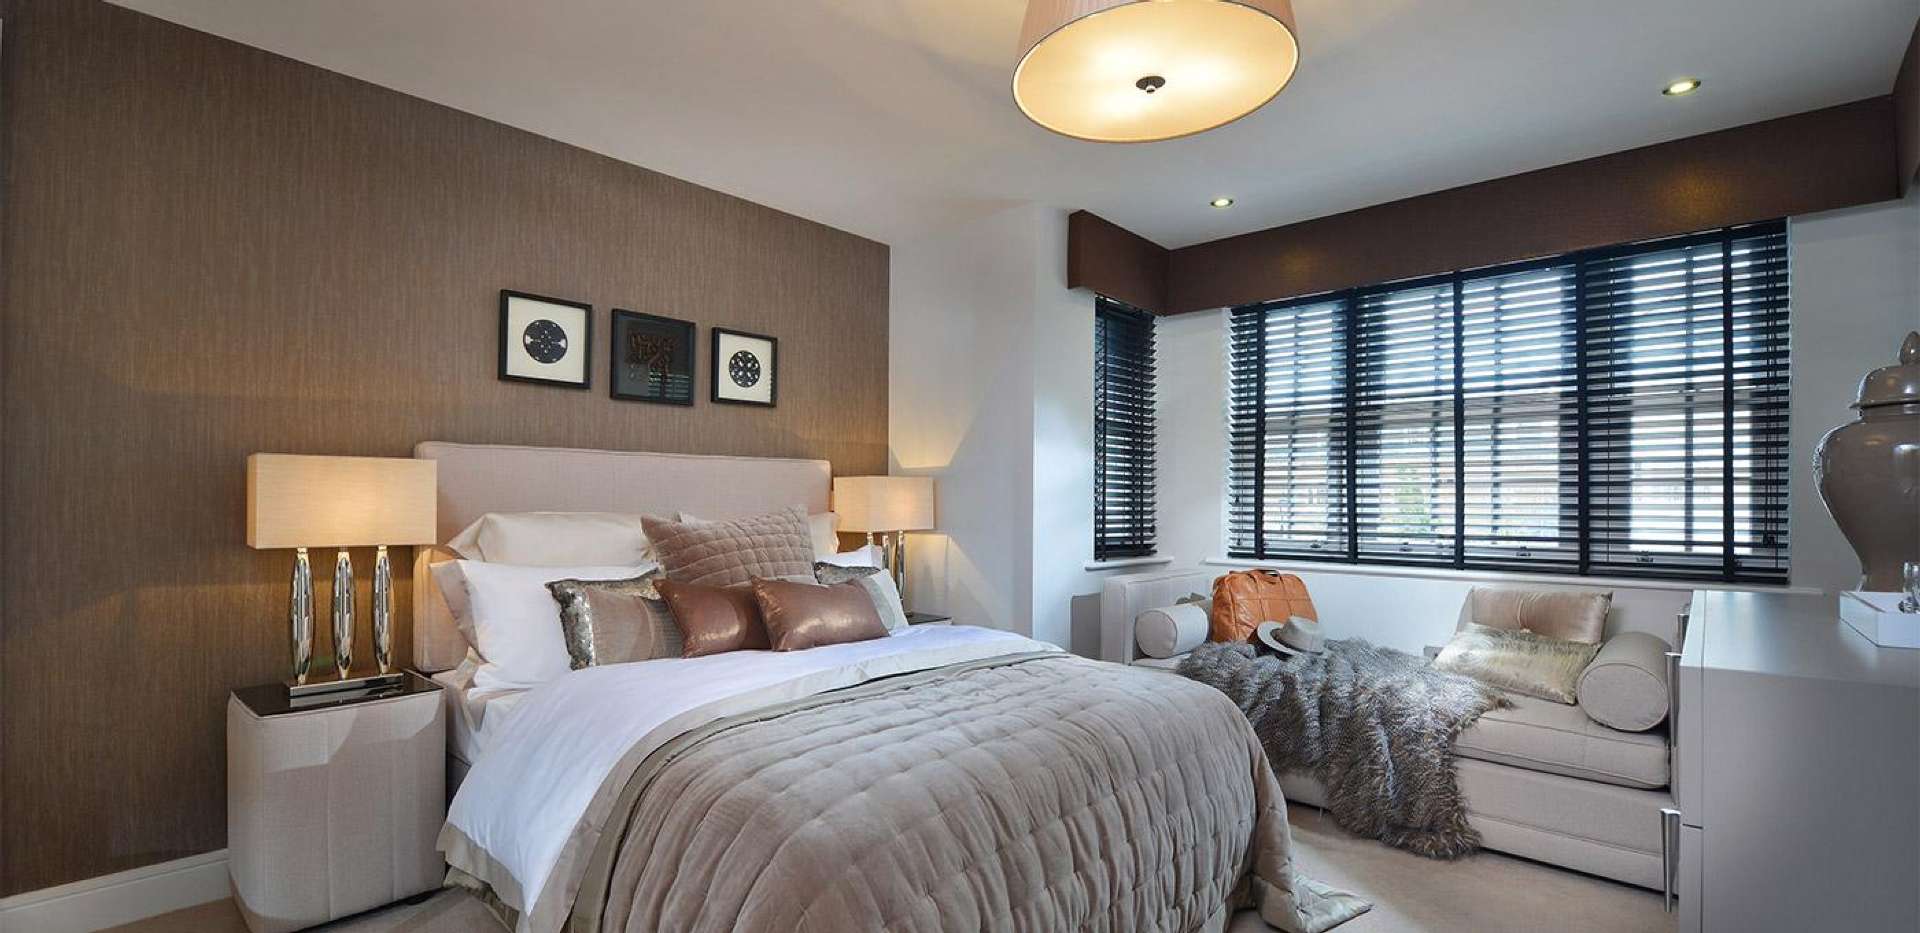 St James, Queen Mary's Place, Show Home, Bedroom, Interior